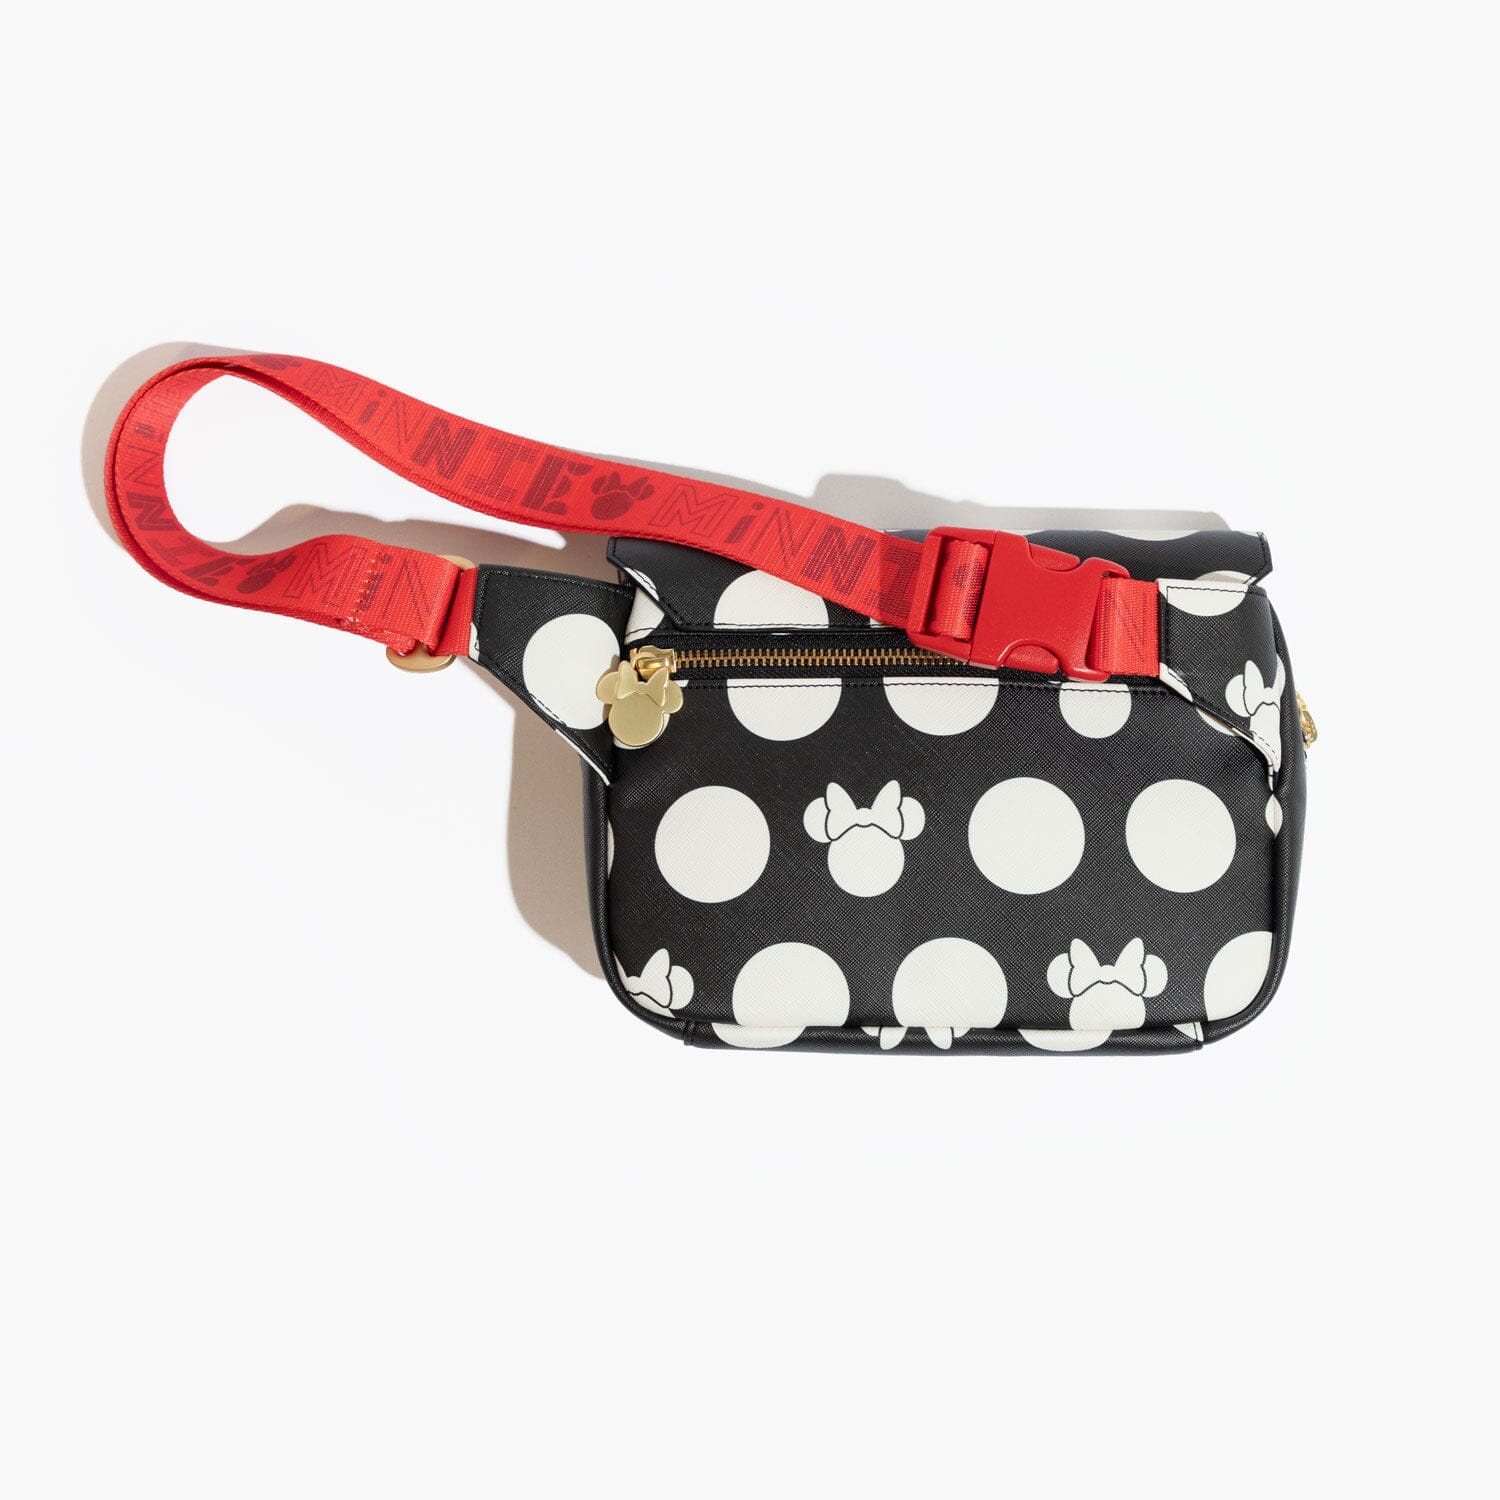 Minnie Lots of Dots Park Pack Classic Park Pack Bag Accessory 